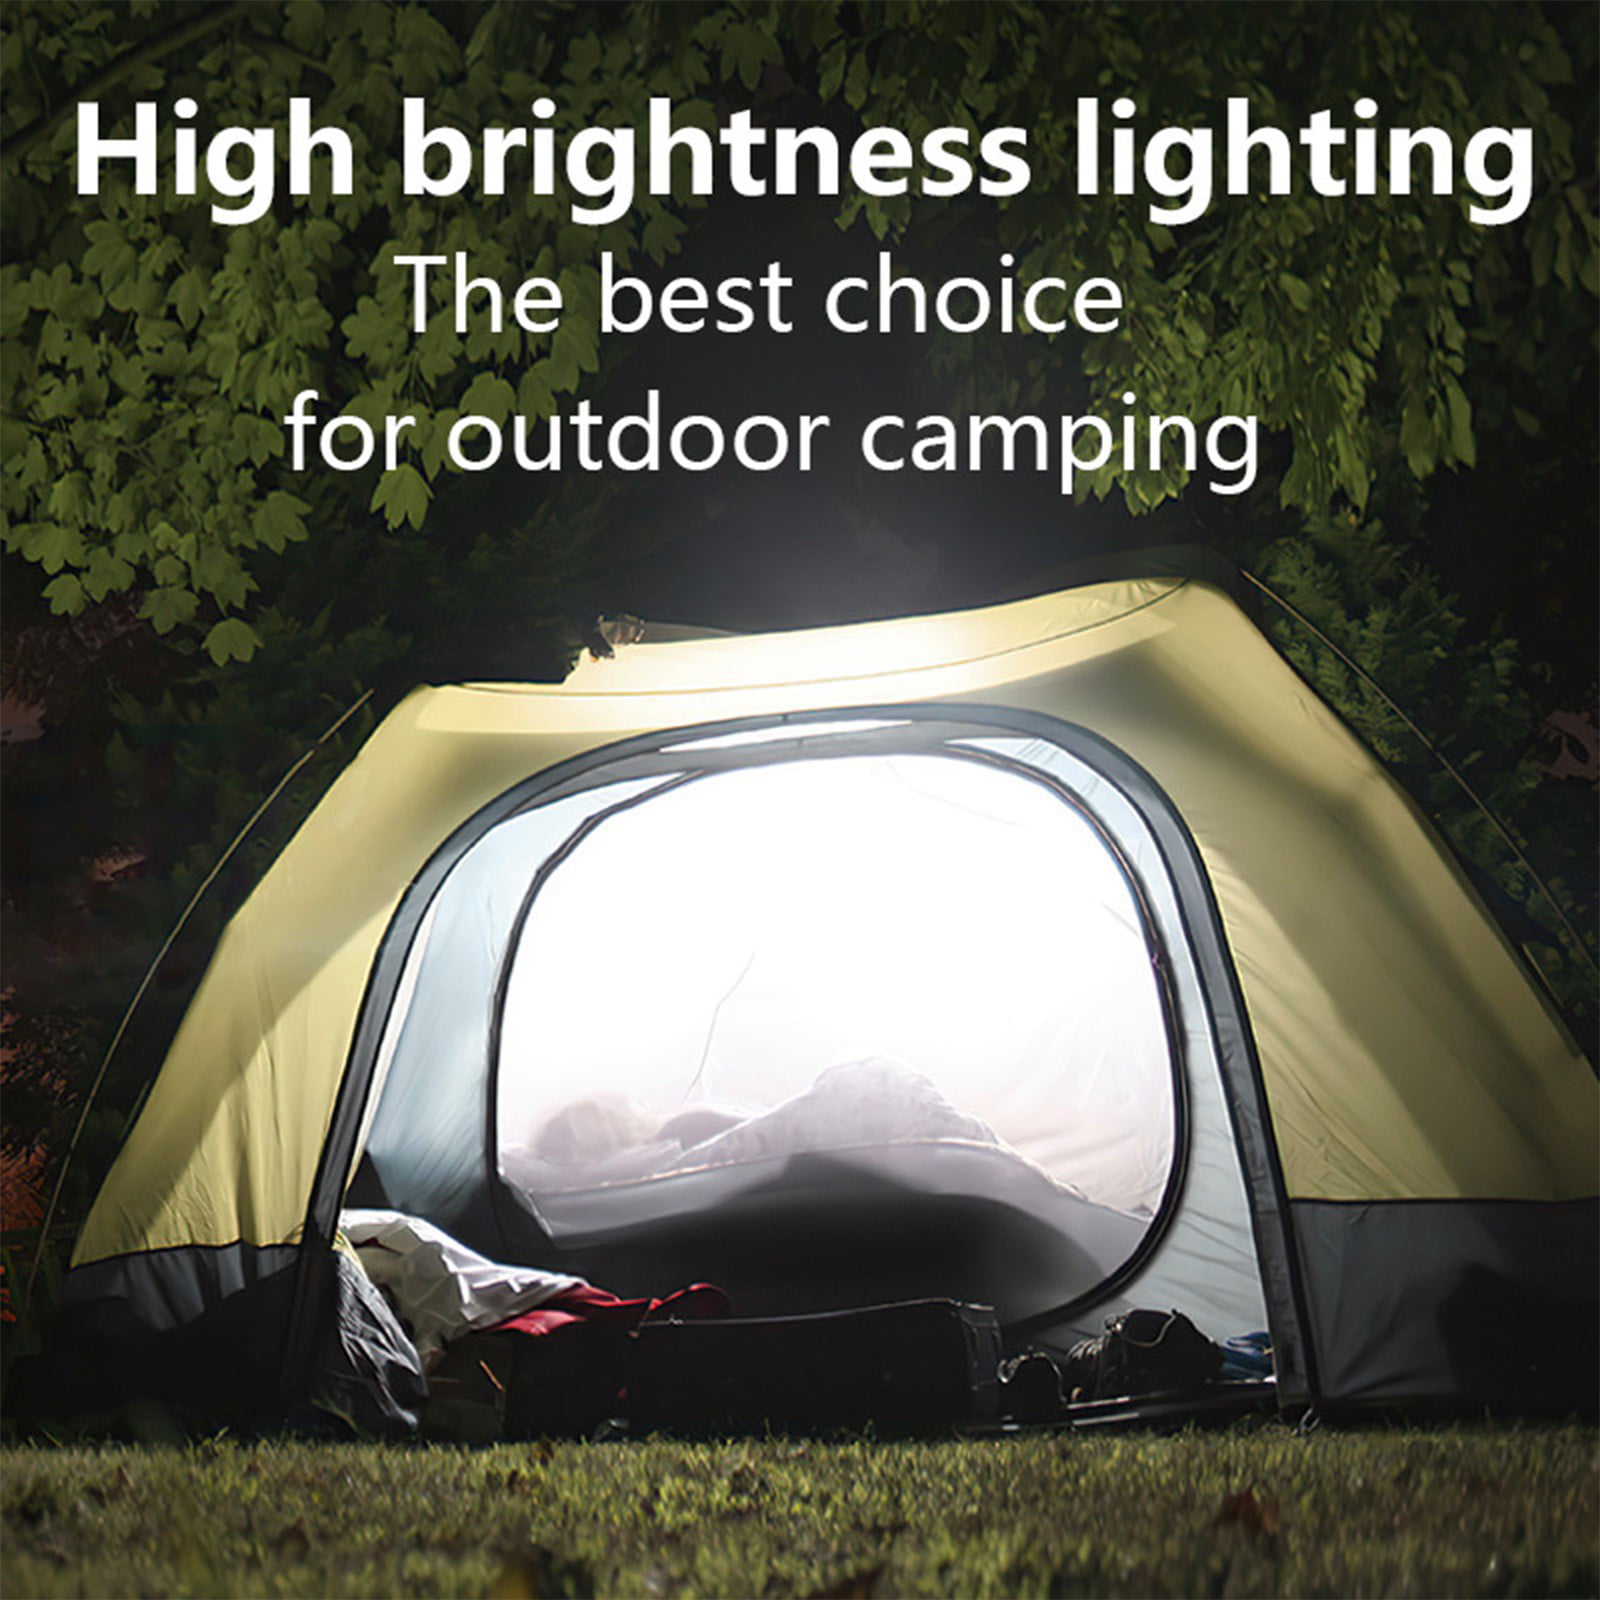 Sports Outdoors Camping Hiking Outdoor Camping Camping Lights Retro Tent  Lights Portable Multifunctional Portable Horse Lights Lights Battery Models